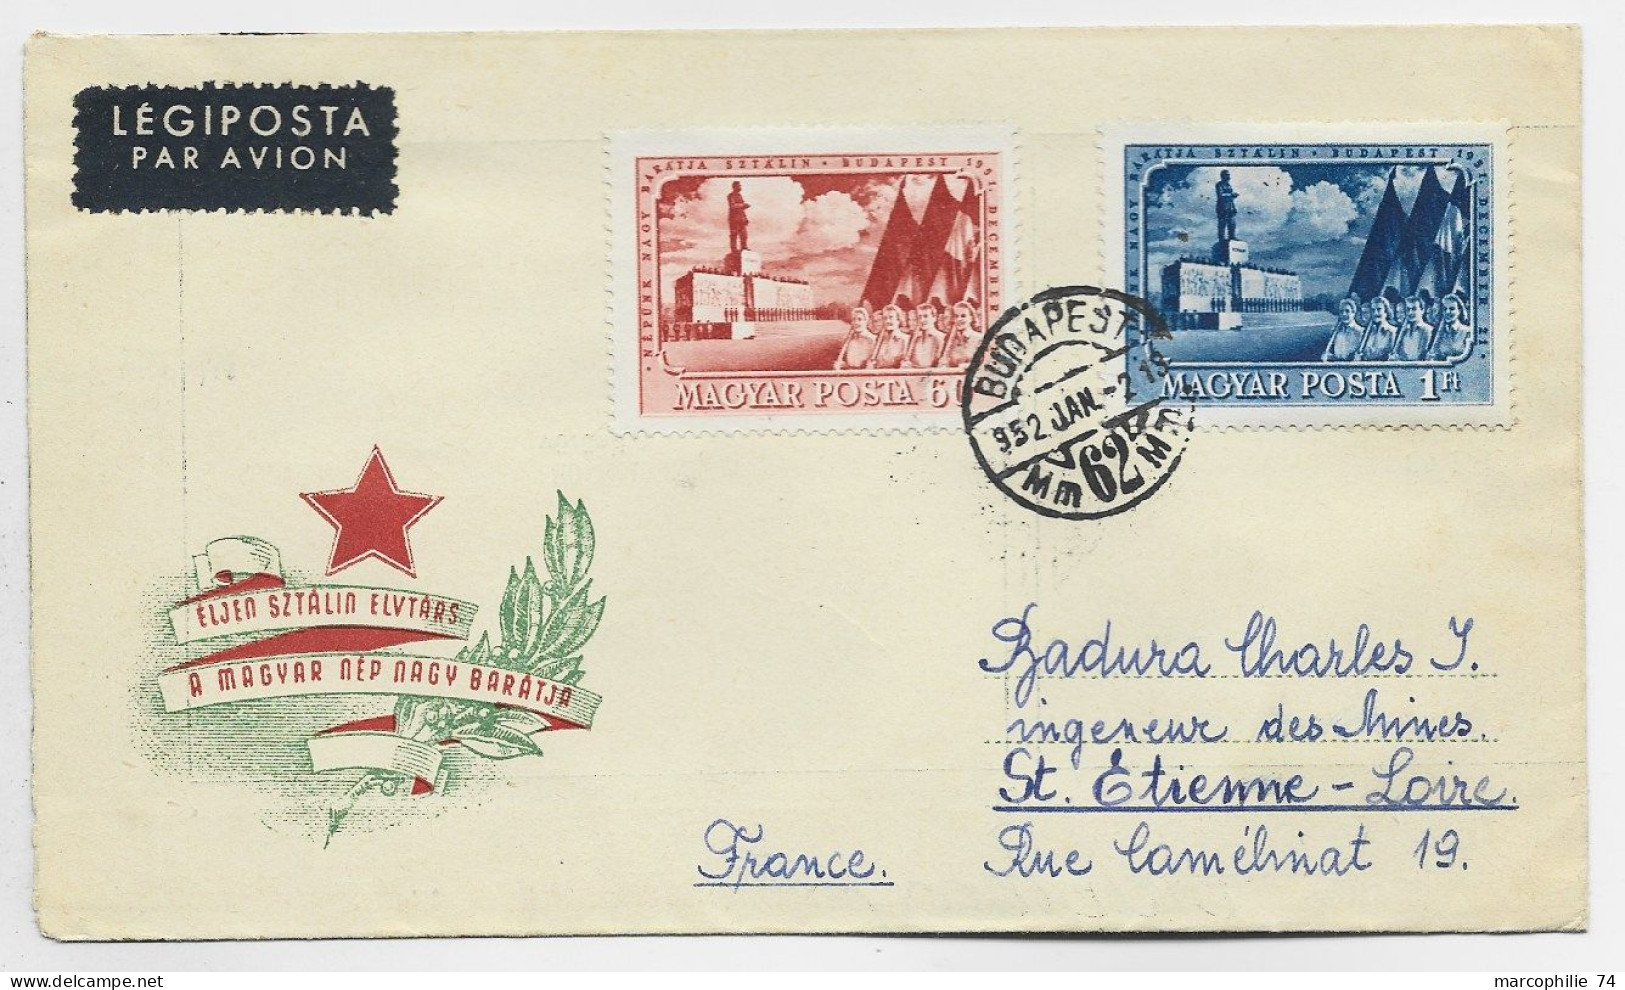 HUNGARY MAGYAR 60F+1FT LETTRE COVER AVION BUDAPEST 2 JANV 1952 TO ST ETIENNE FRANCE - Covers & Documents